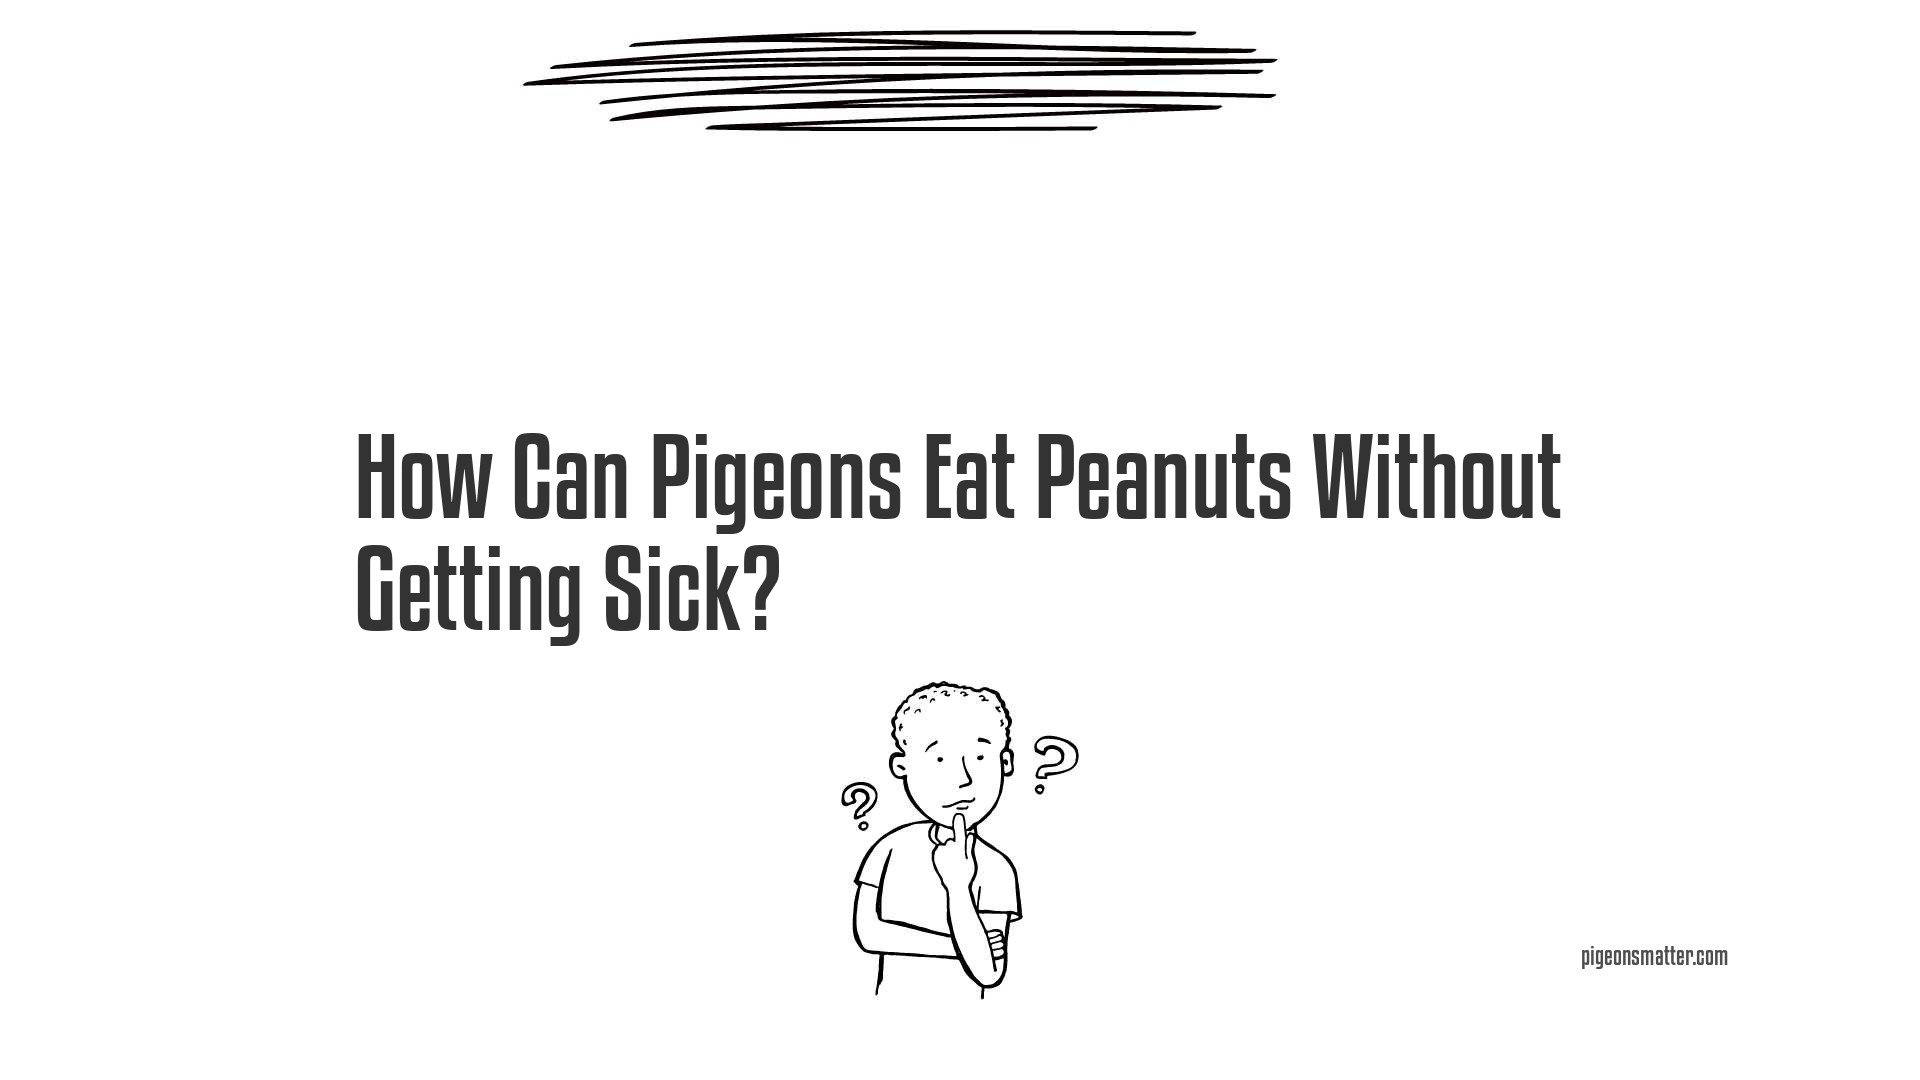 How Can Pigeons Eat Peanuts Without Getting Sick?